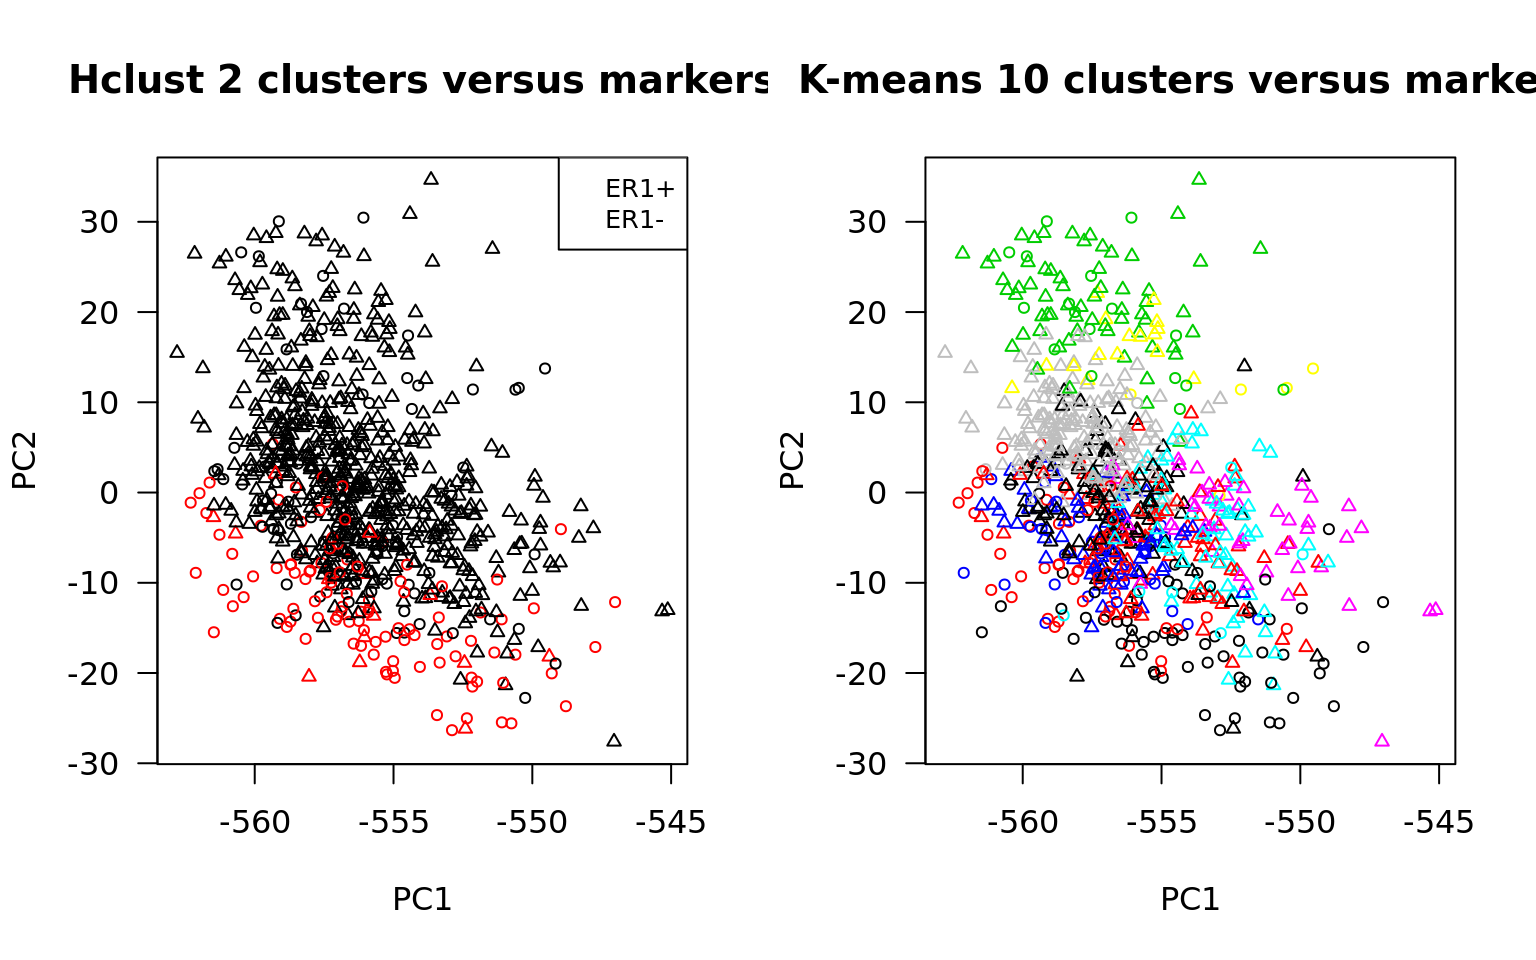 Intra-cluster variance plot. for a series of k-mean clustering with increasing values of k.  